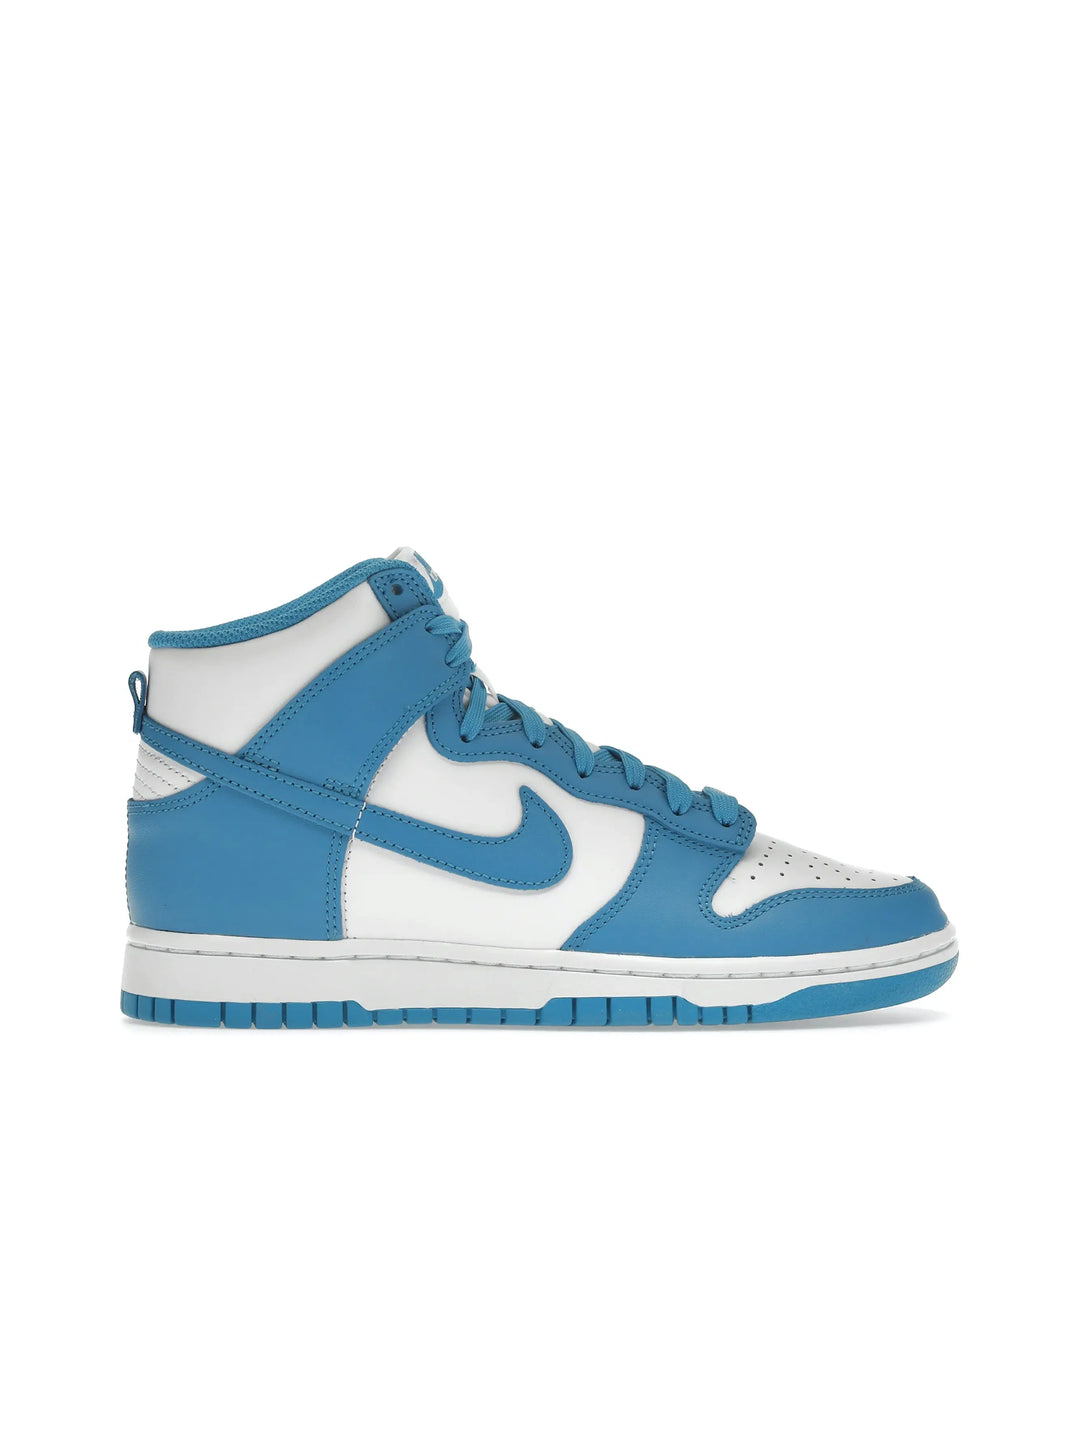 Nike Dunk High Retro Laser Blue in Auckland, New Zealand - Shop name